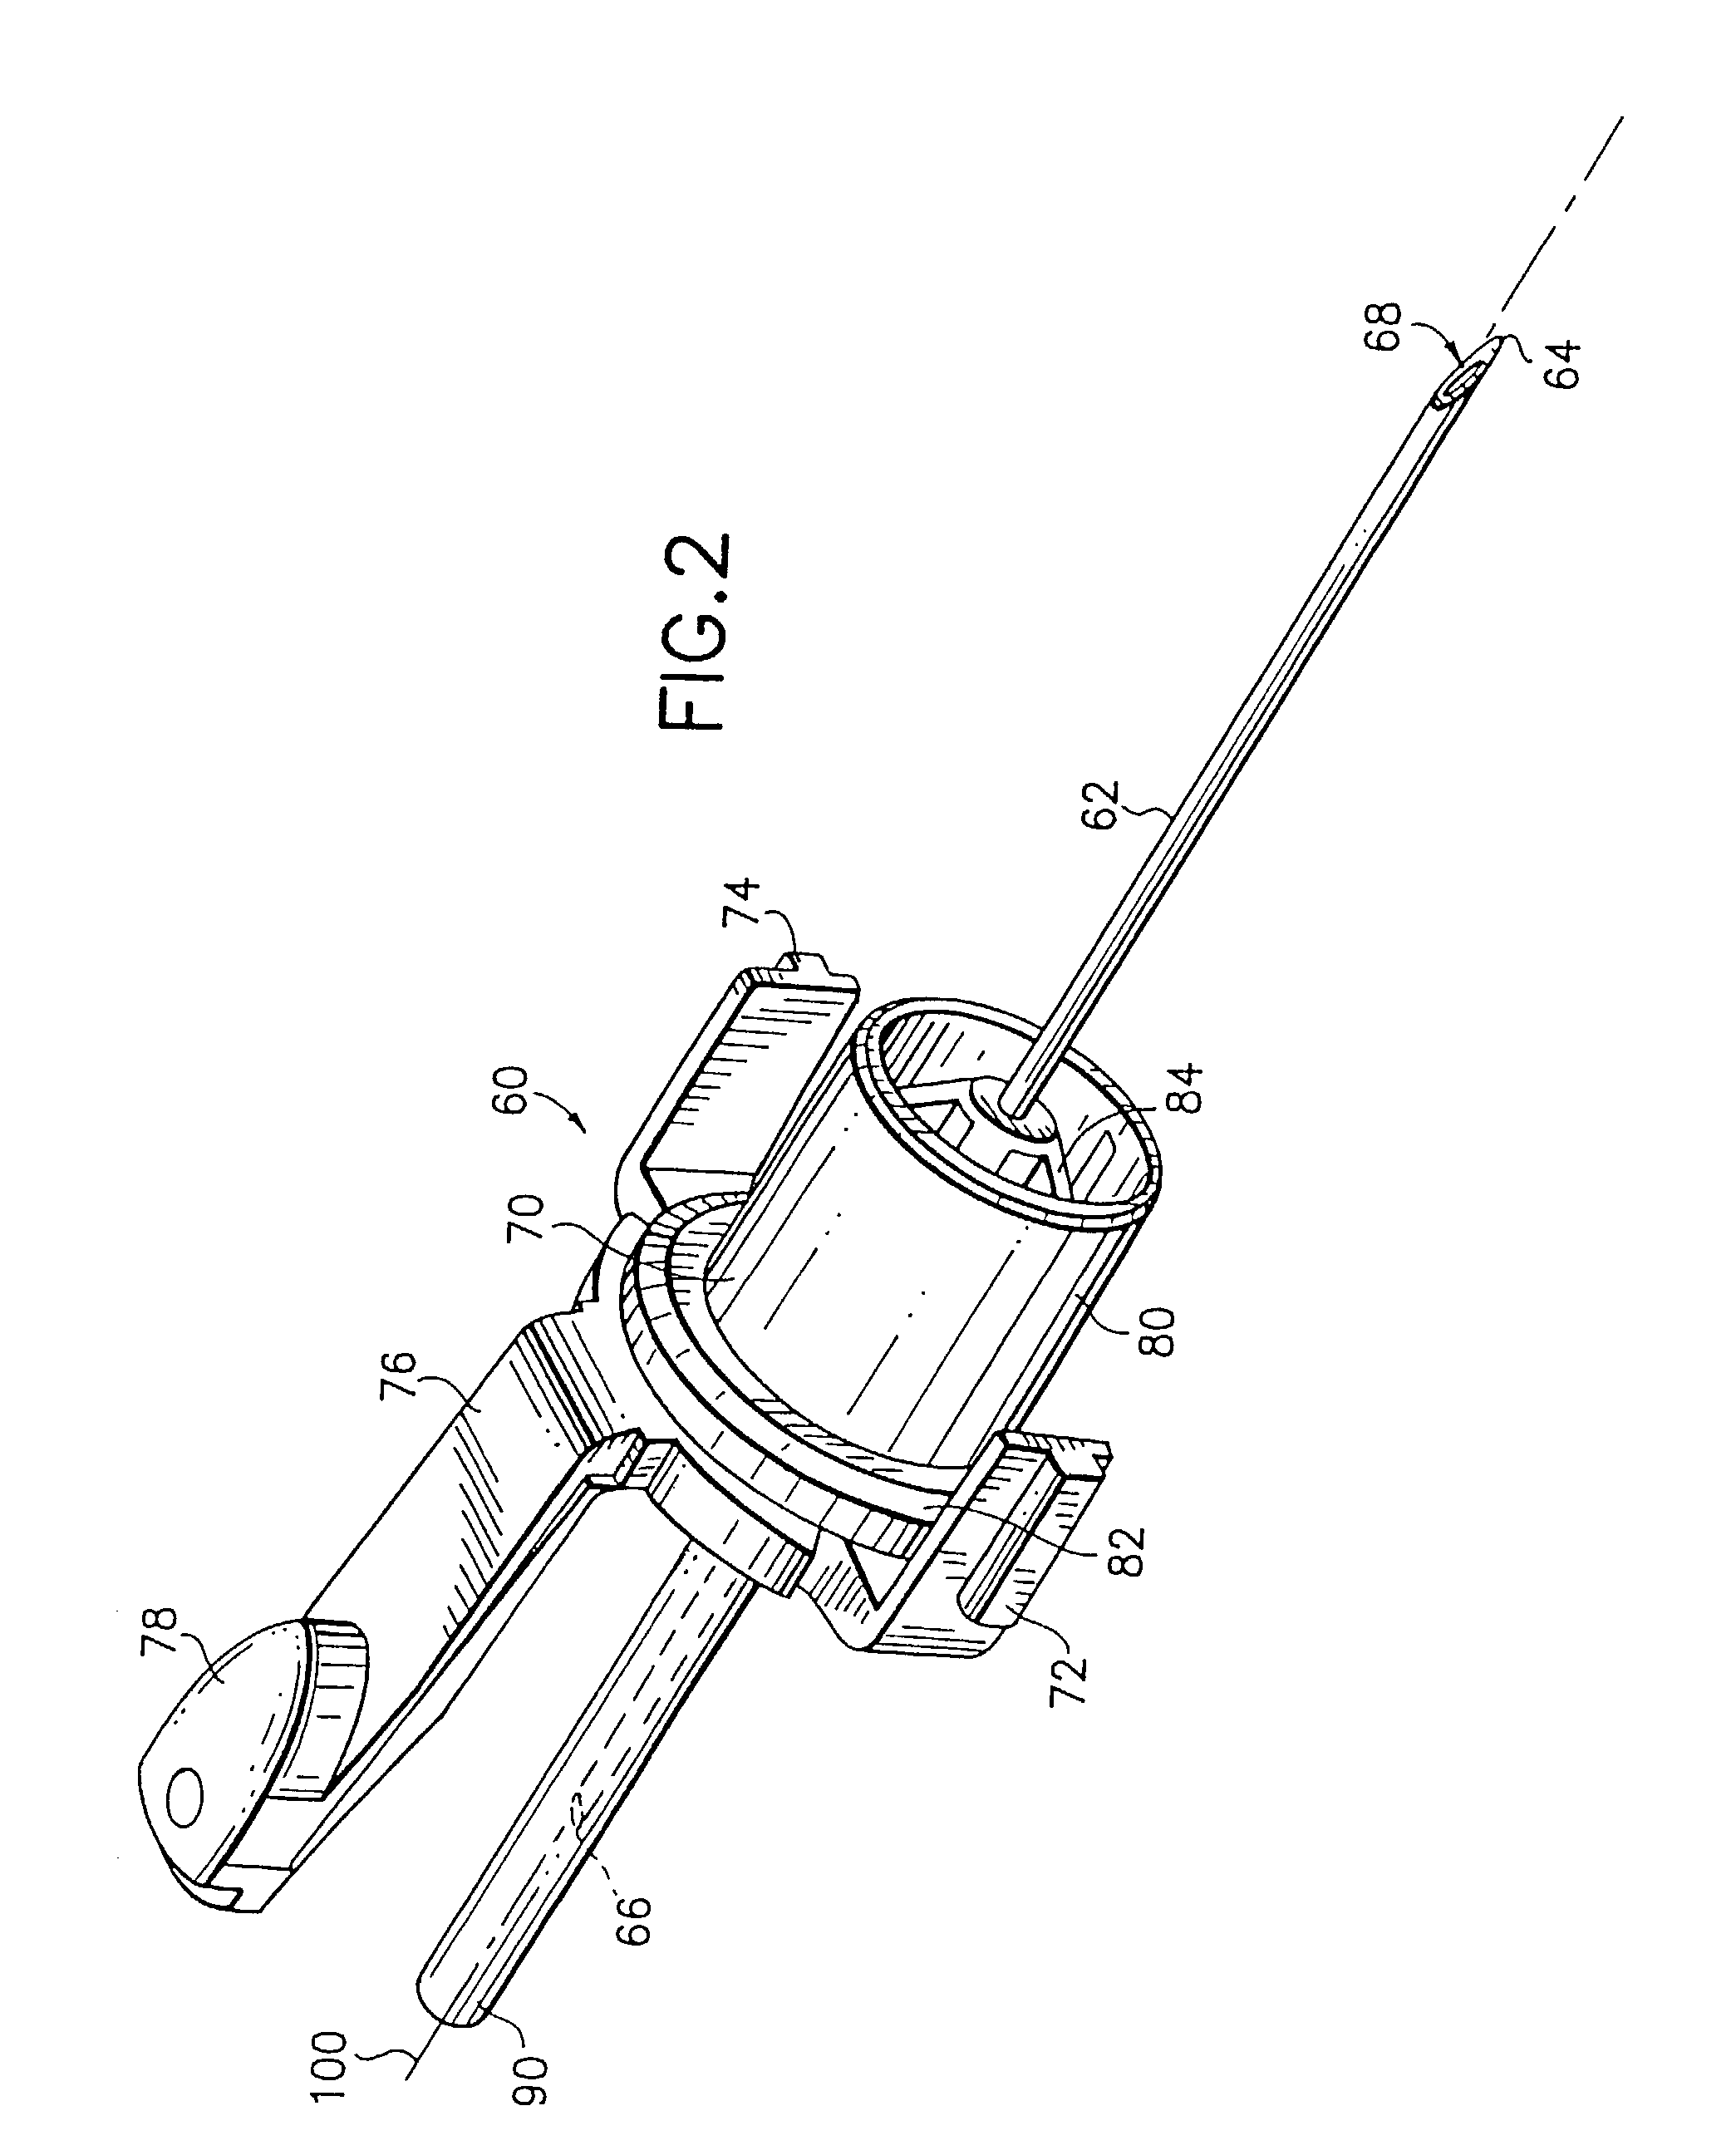 Retracting needle safety device